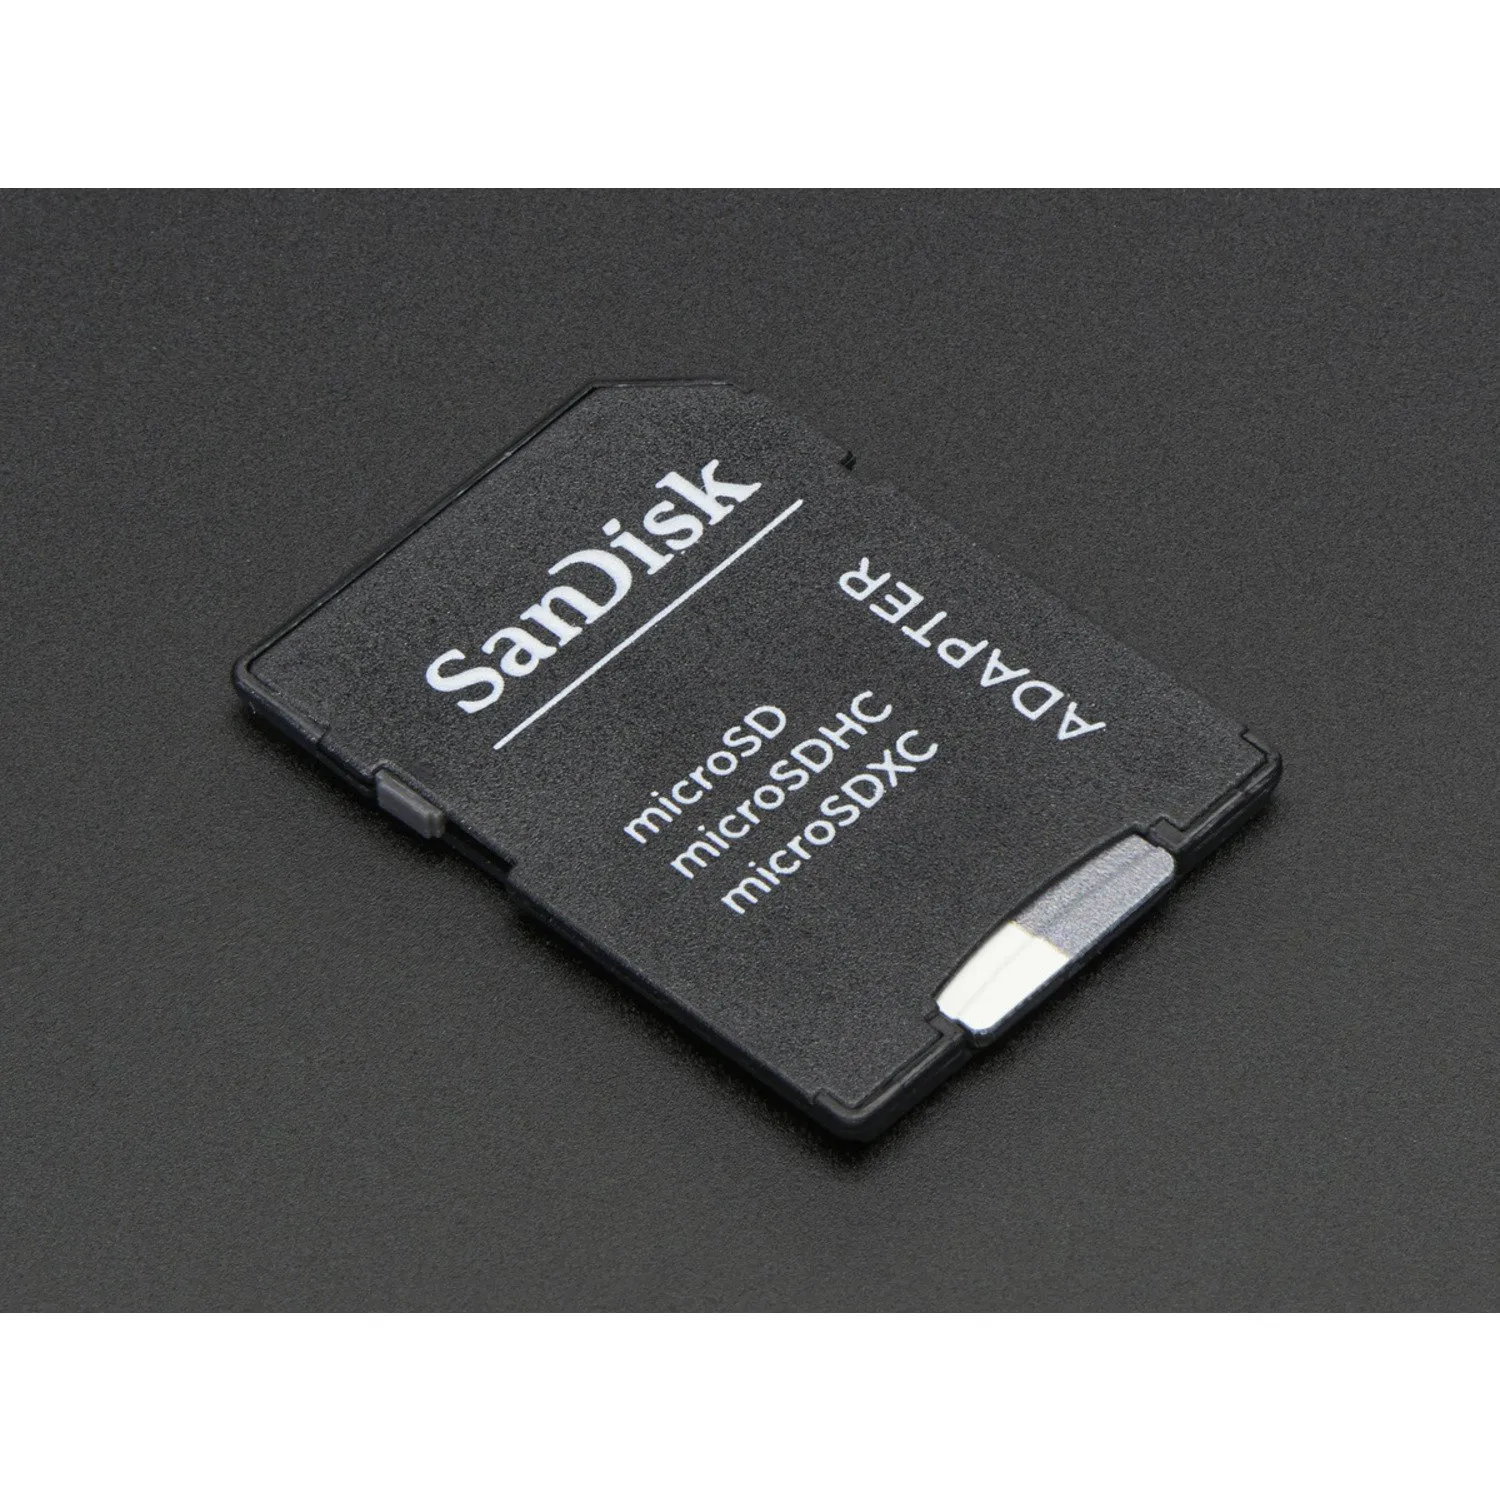 Photo of SD/MicroSD Memory Card - 16GB Class 10 - Adapter Included